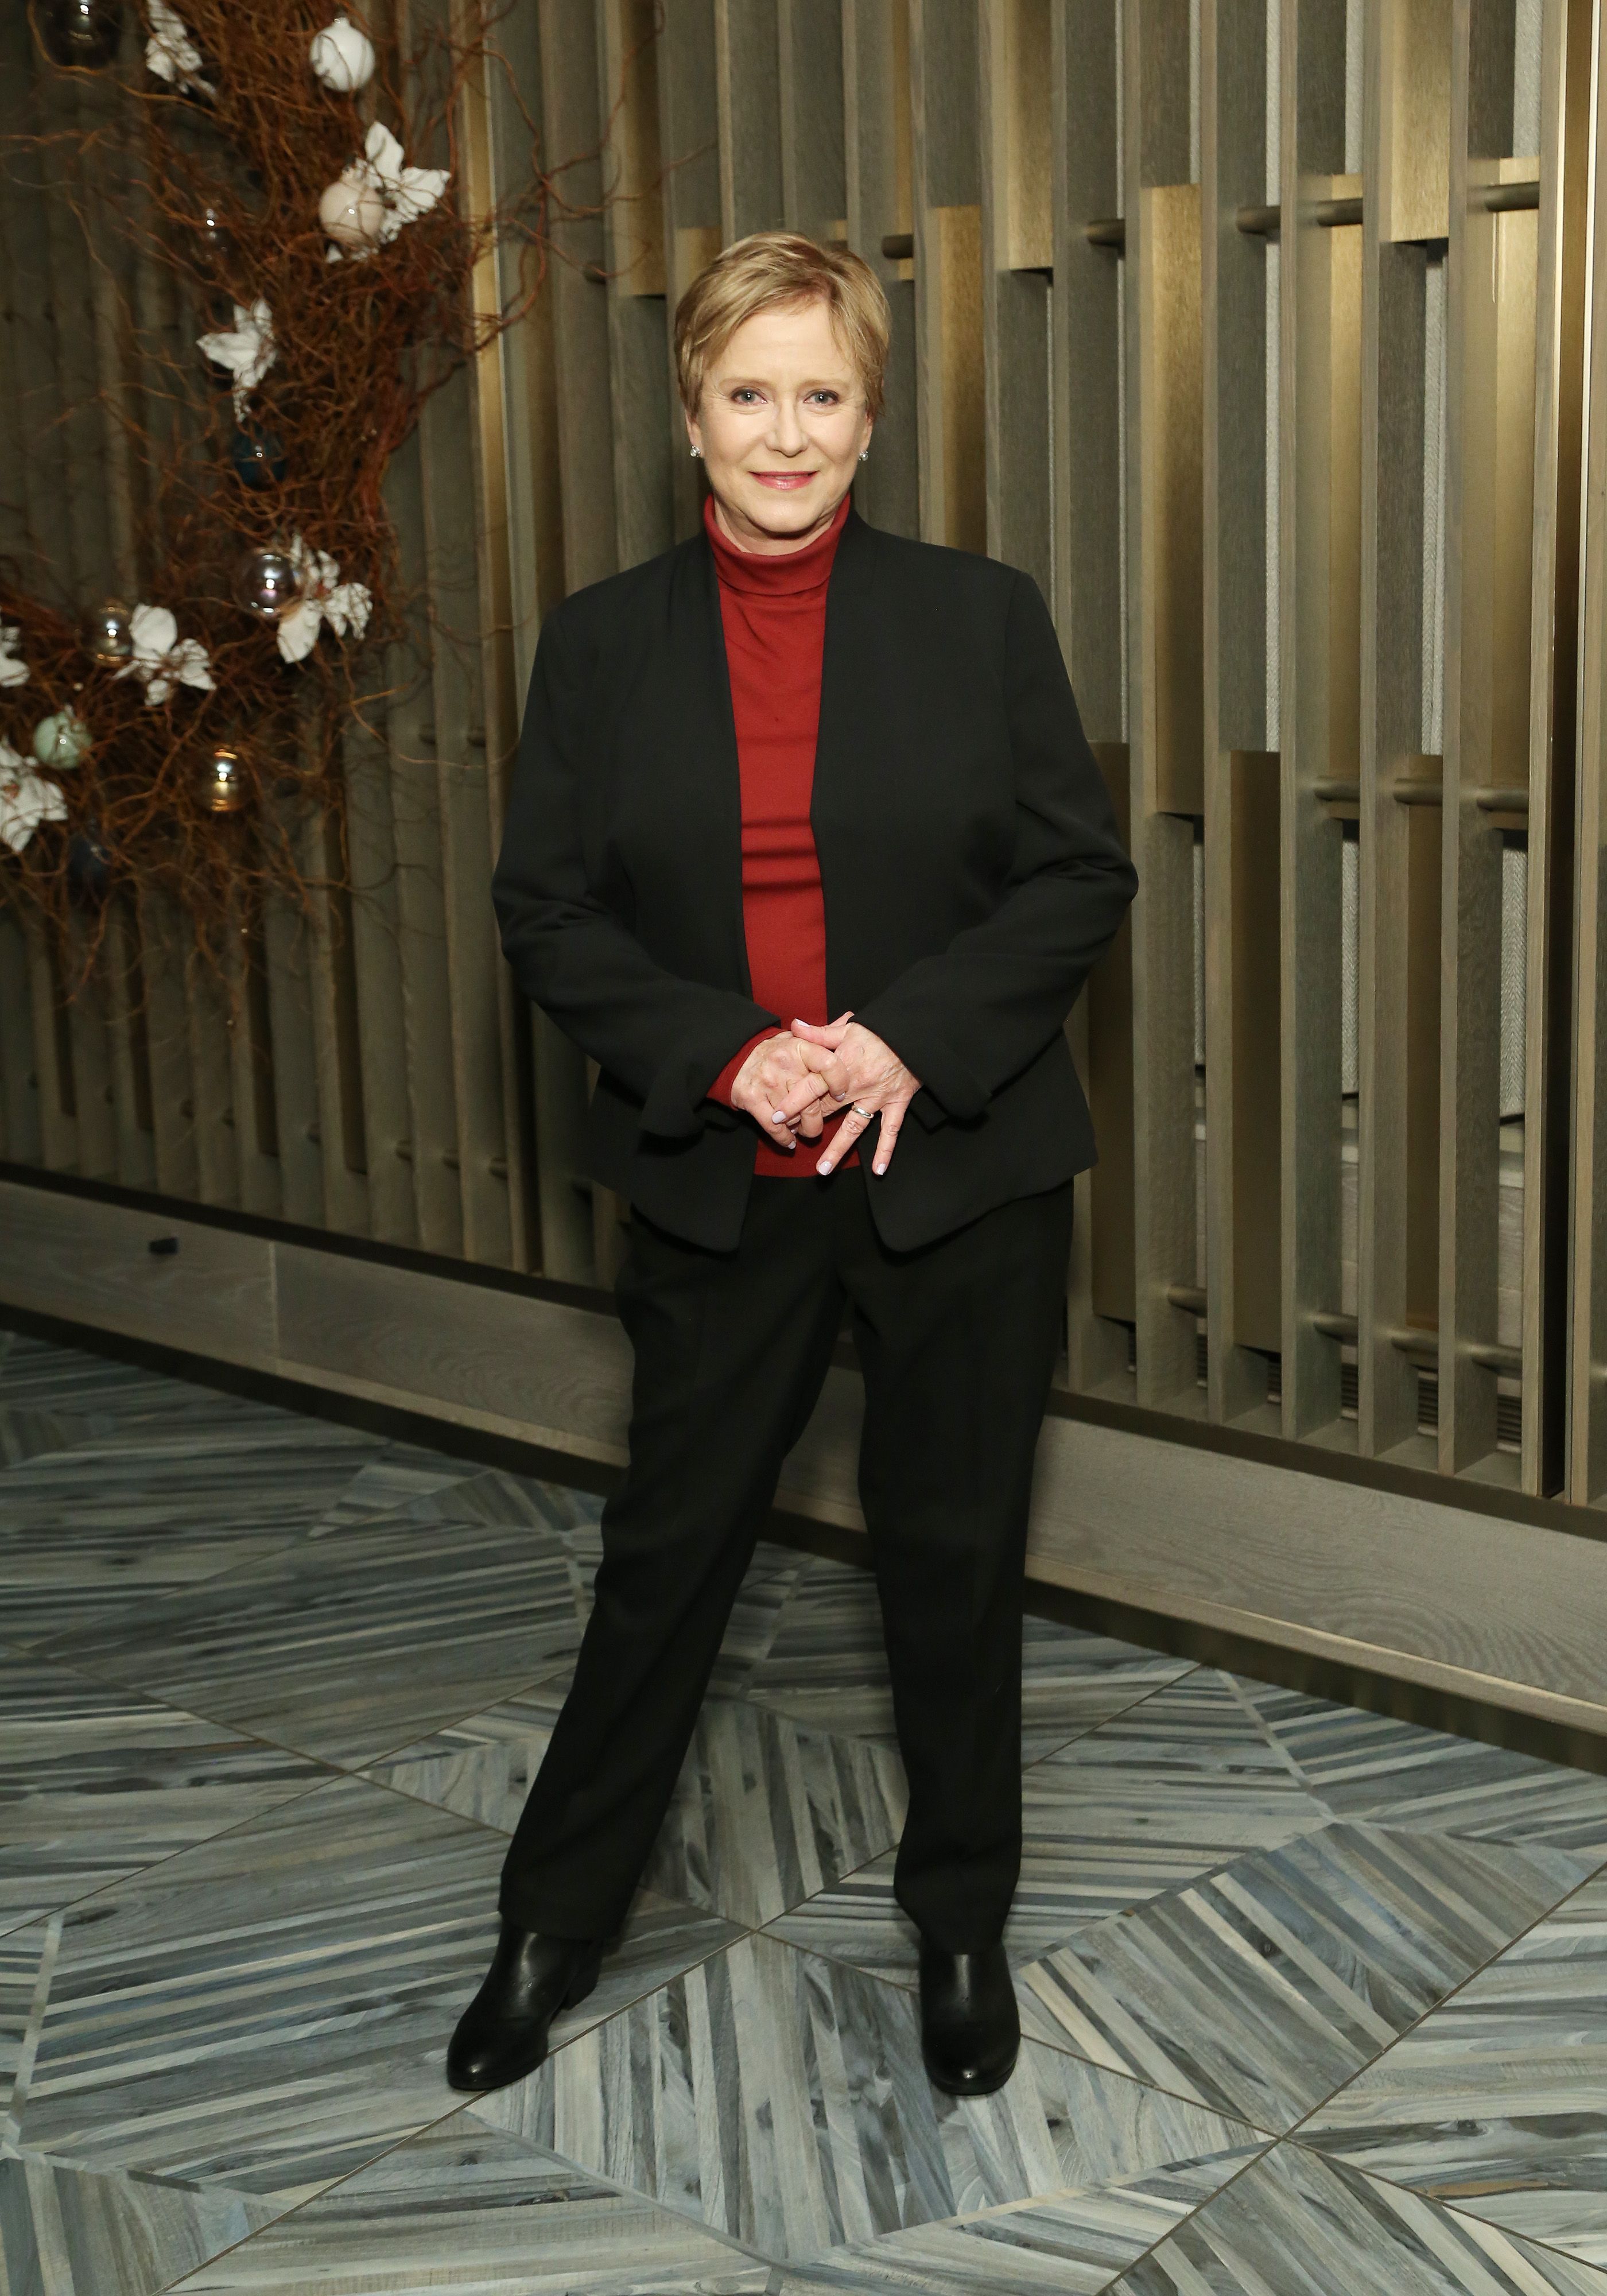 Eve Plumb attends the Cinema Society's special screening of Togo at iPic Fulton Market on December 09, 2019 in New York City. | Source: Getty Images